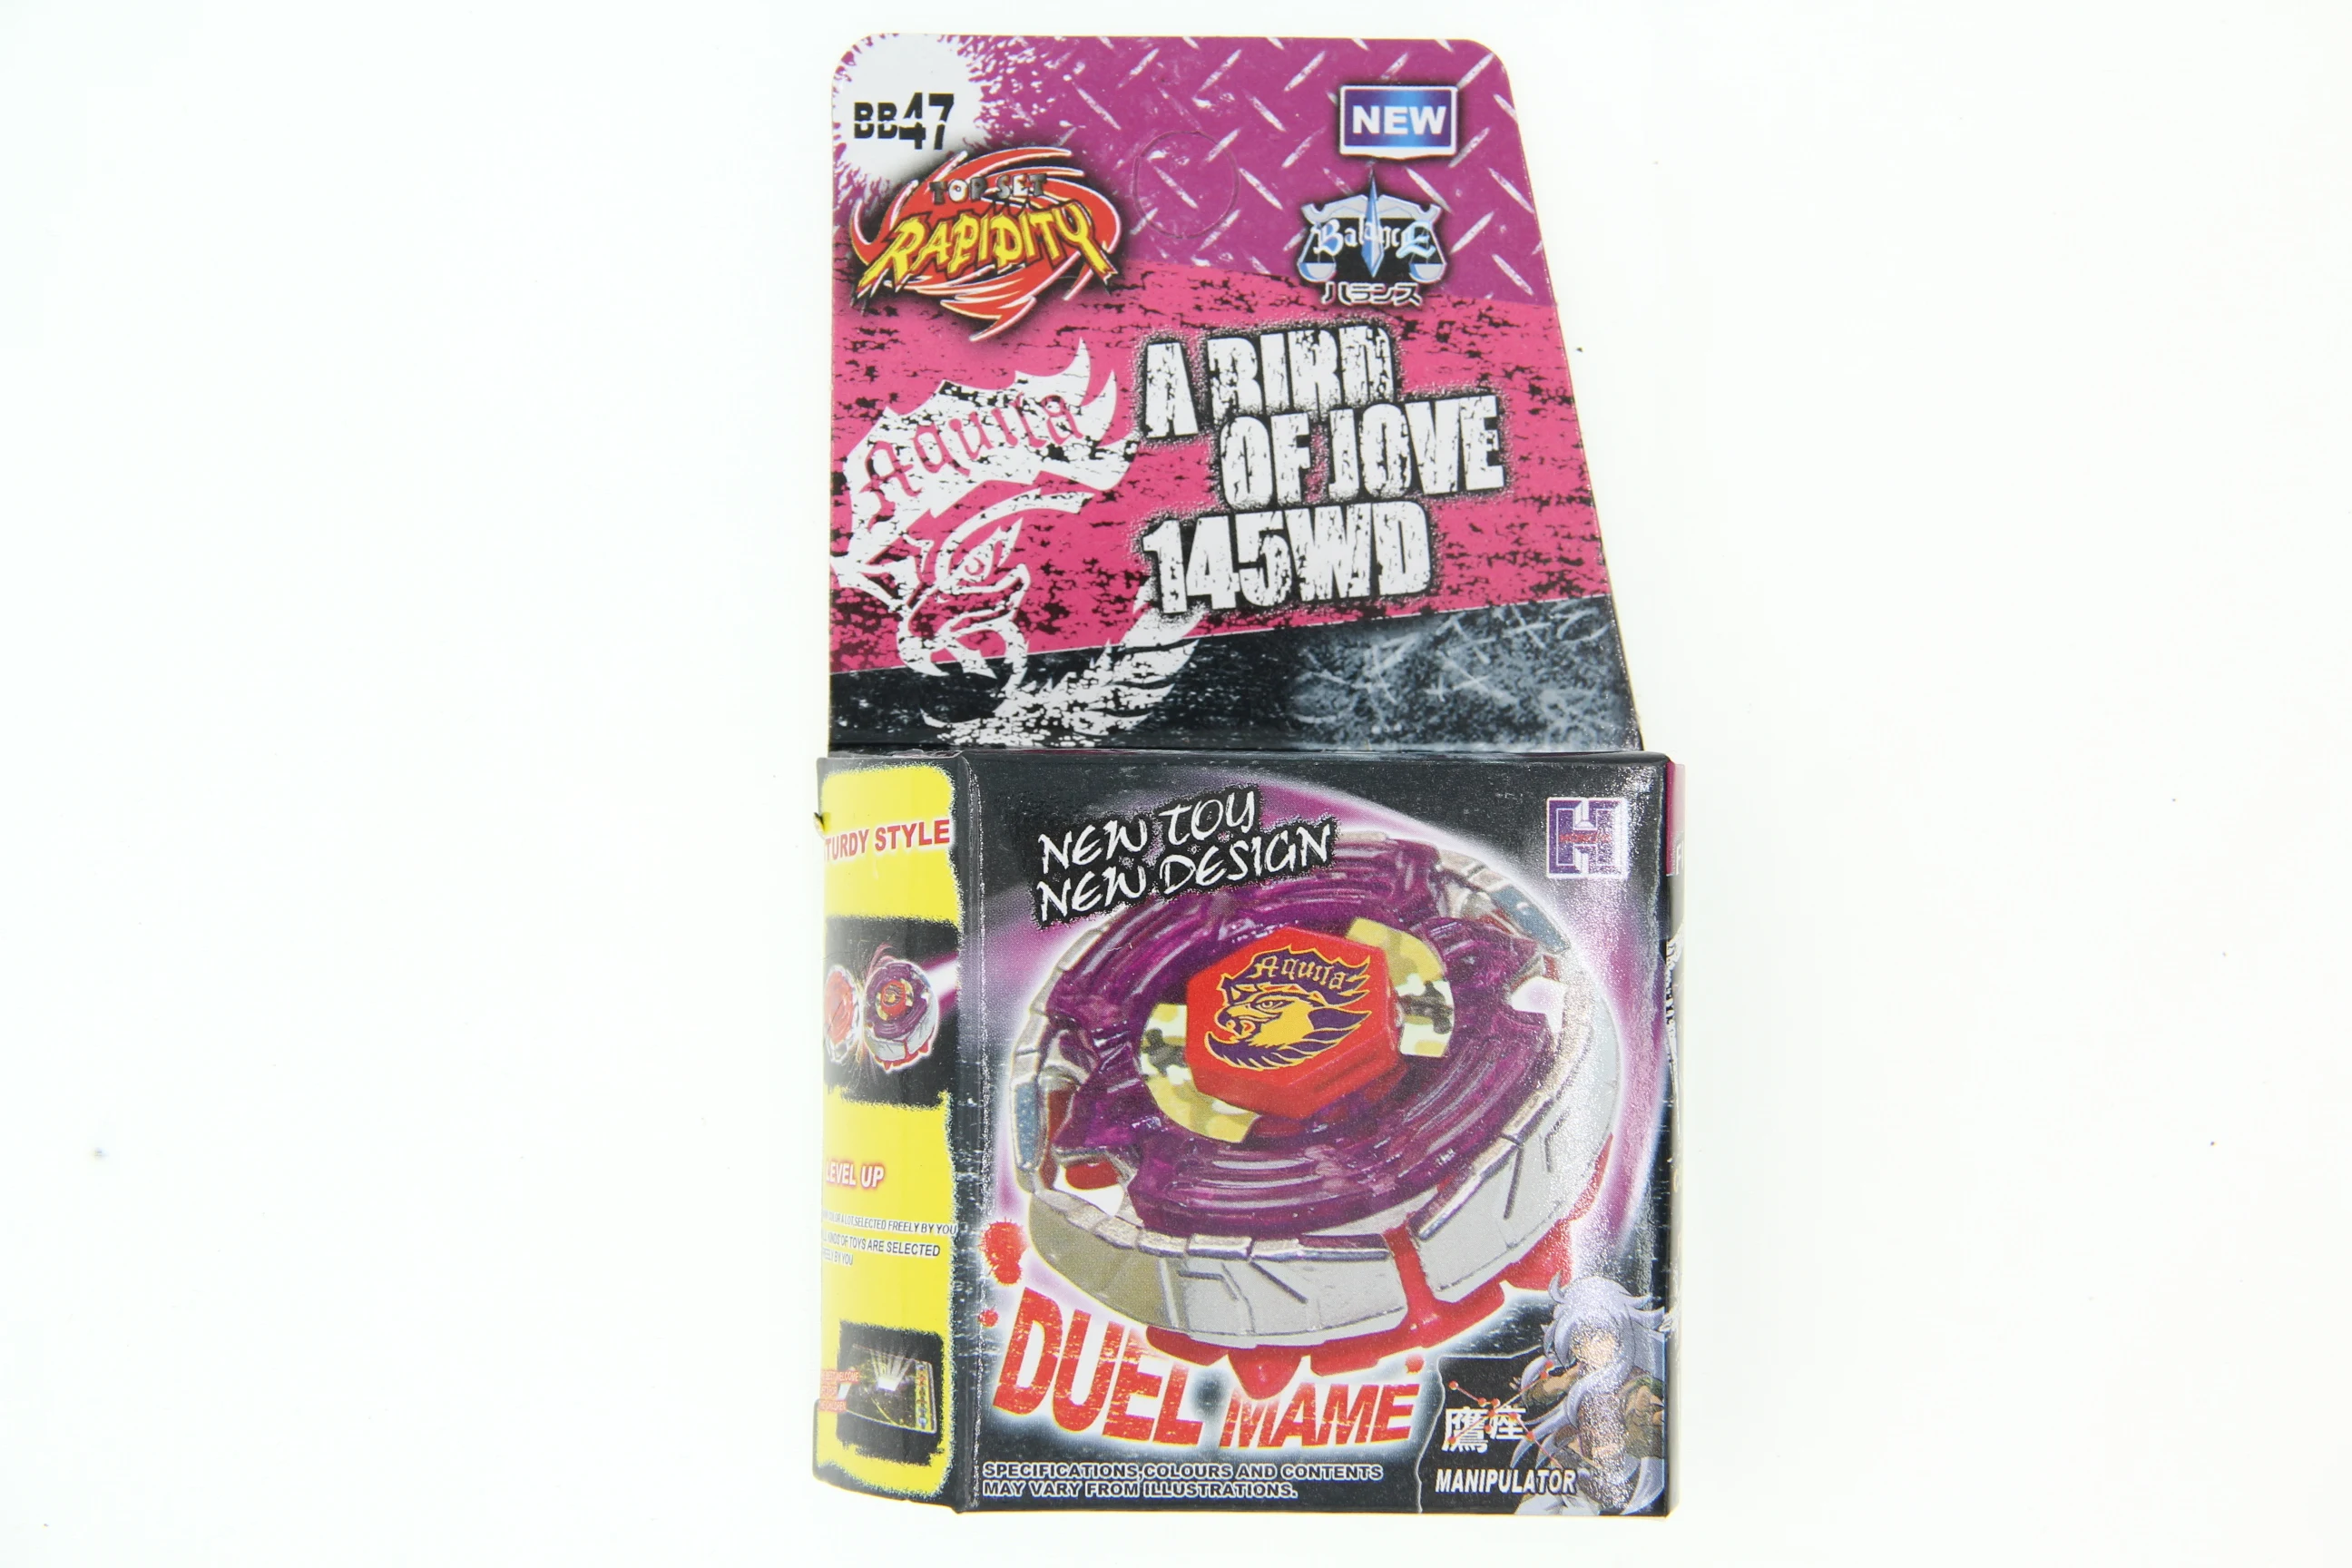 B-X TOUPIE BURST BEYBLADE SPINNING TOP Earth Eagle (Aquila) 145WD BB47 RARE Without Launcher